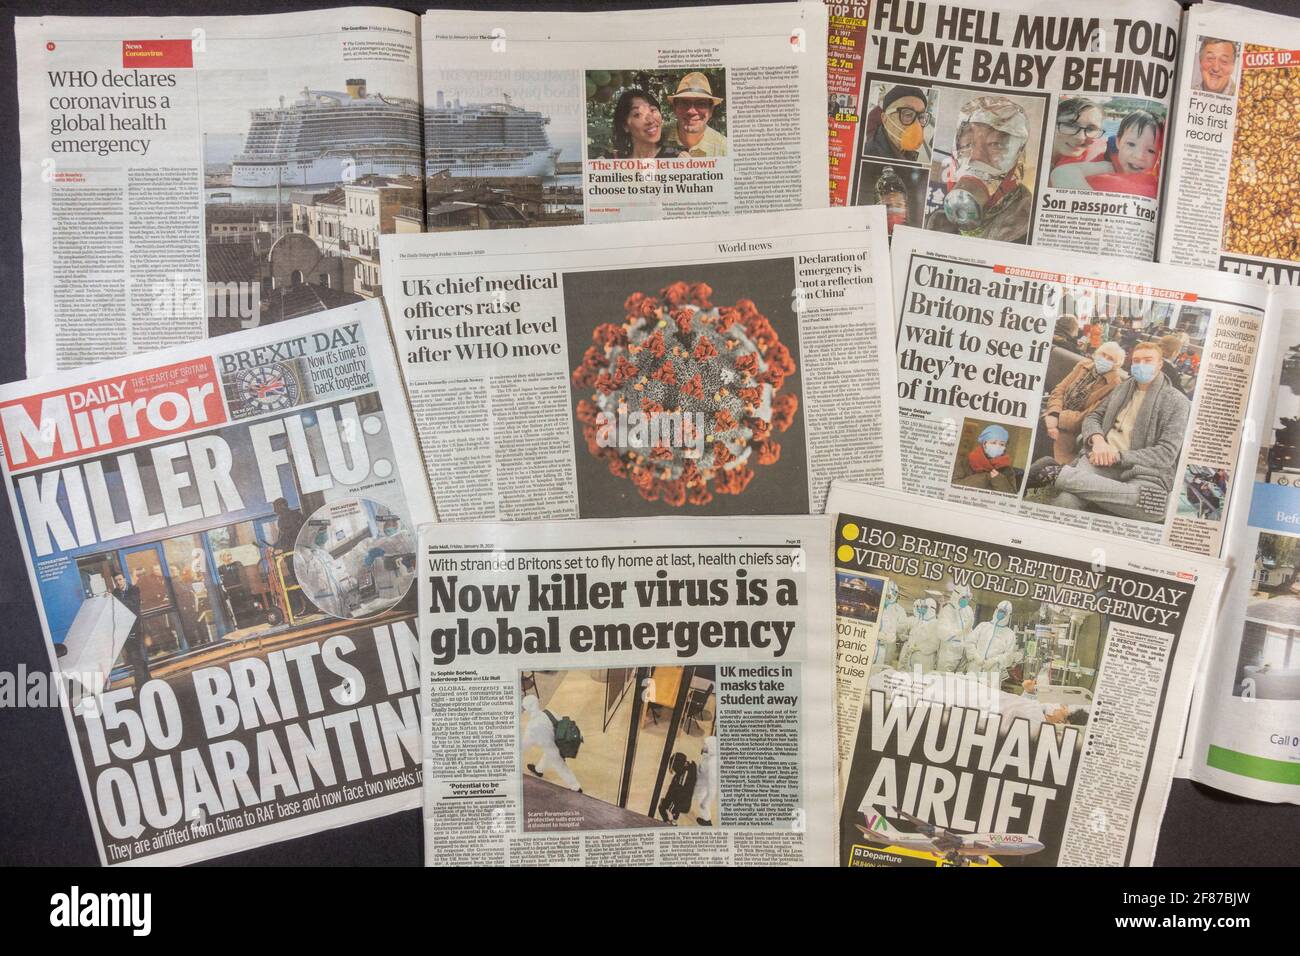 Collage of UK newspaper articles about COVID-19/coronavirus before the reality really hit the UK (papers from 31st January 2020). Stock Photo